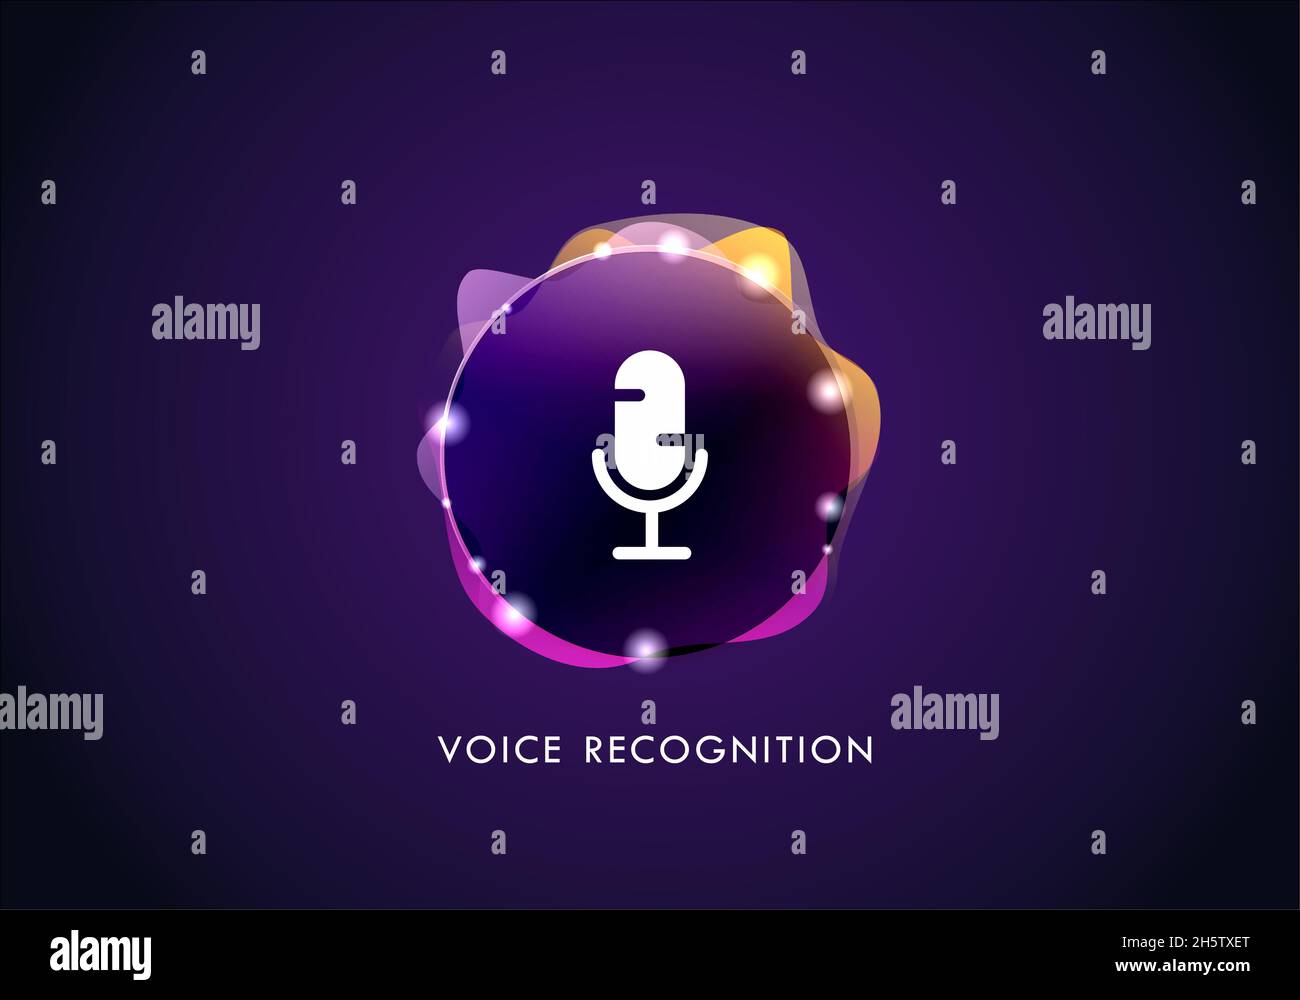 voice recognition concept flat vector illustration of sound symbol intelligent technologies Stock Vector